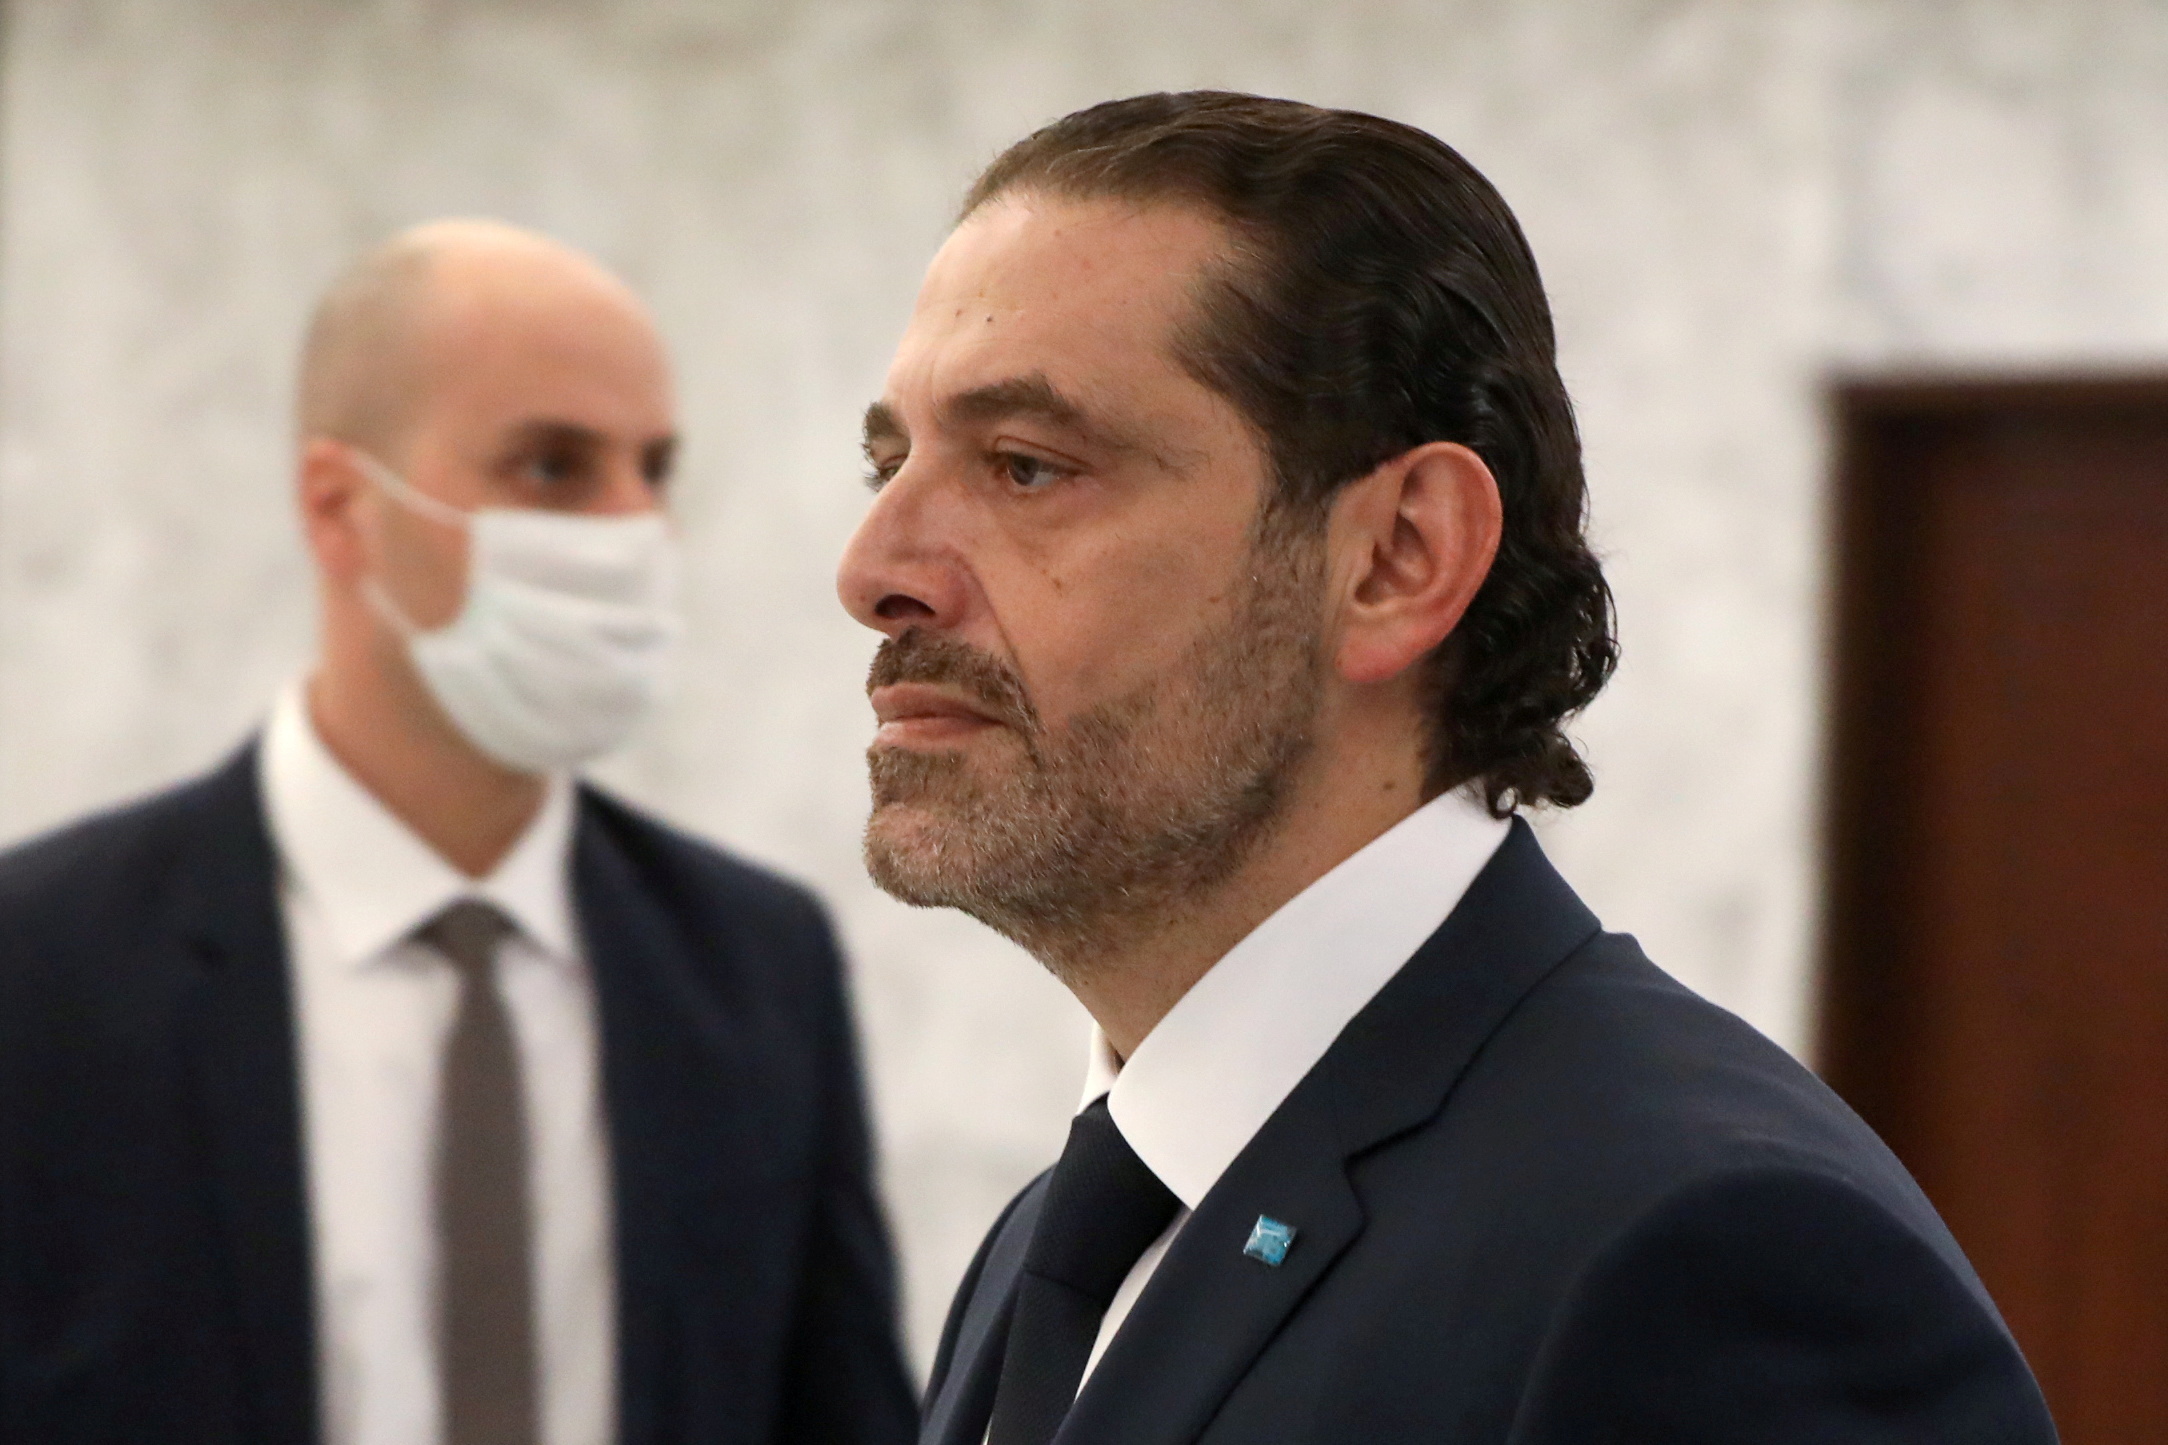 Prime Minister-designate Saad al-Hariri walks by after meeting with Lebanon's President Michel Aoun at the presidential palace in Baabda